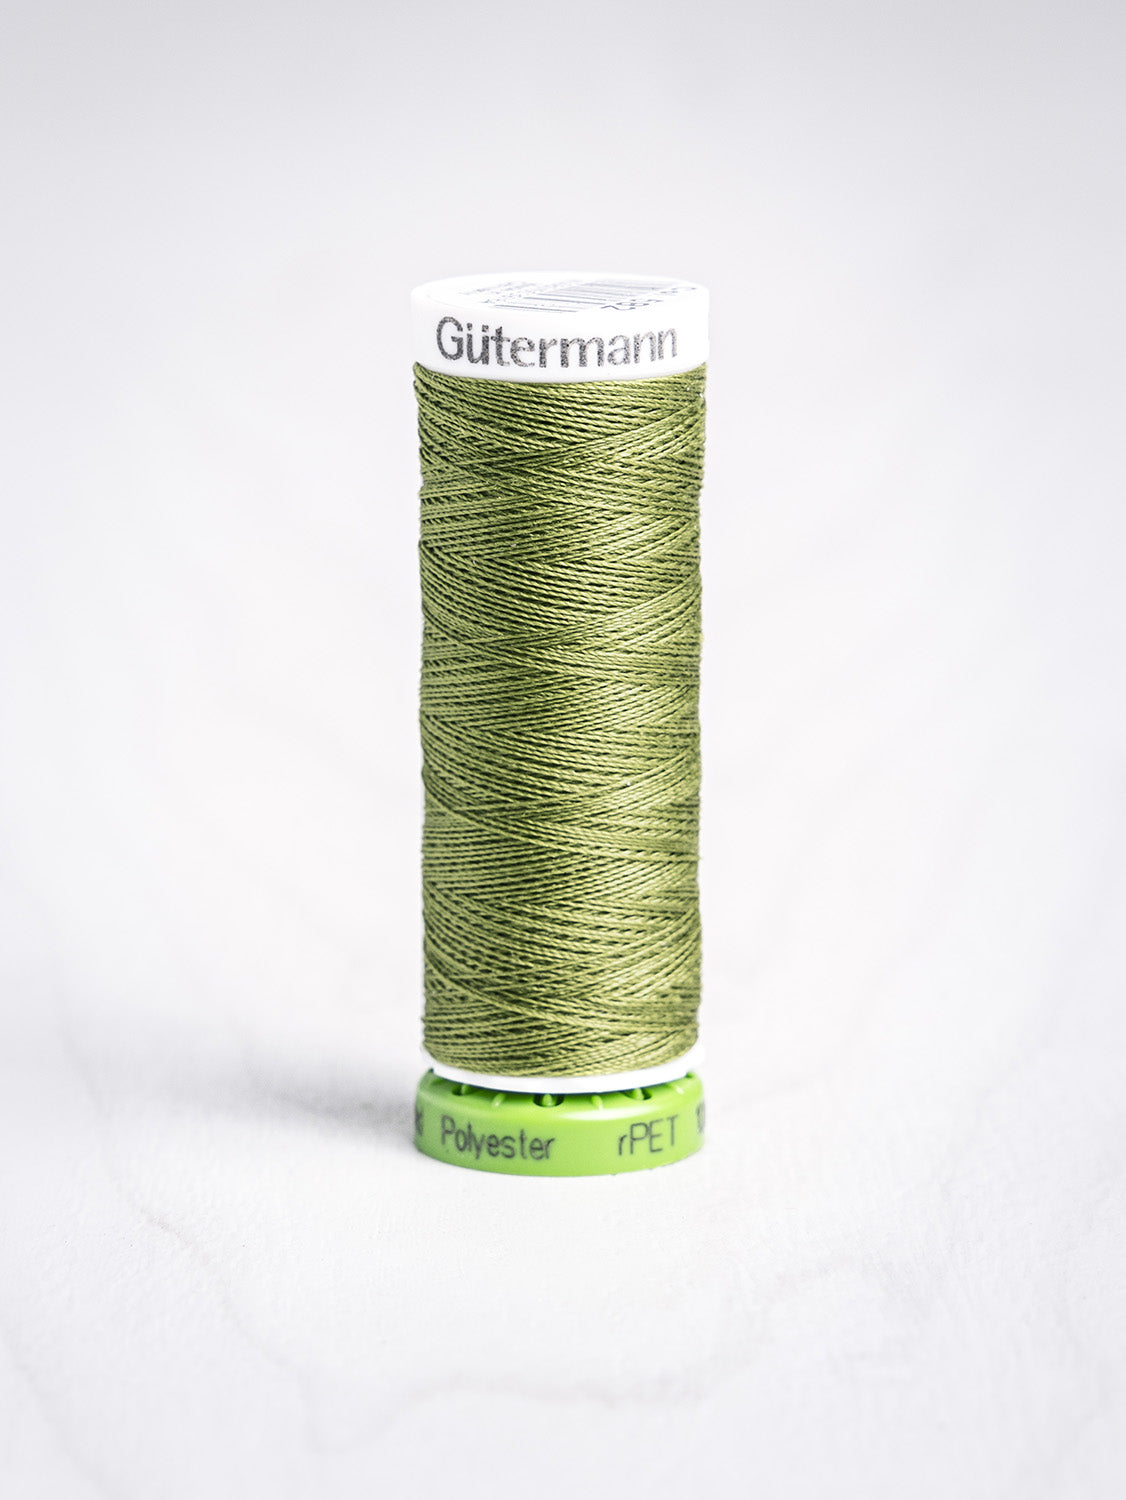 Gütermann All Purpose rPET Recycled Thread - Pale Green 582 | Core Fabrics